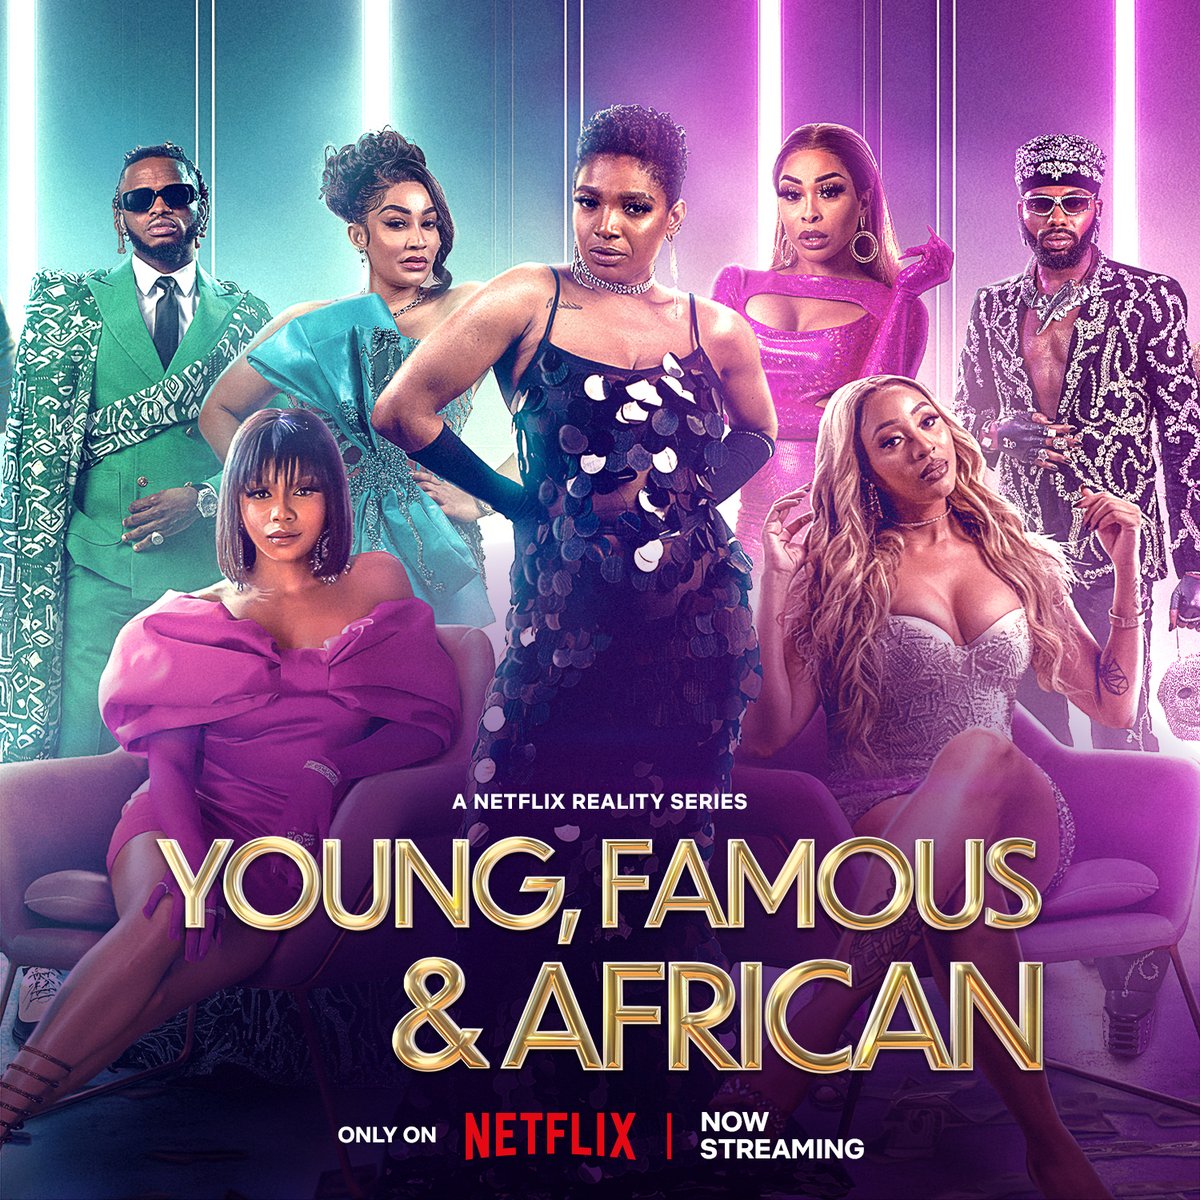 New faces, bigger diamonds and more drama. 💎

Follow Africa's most famous and fabulous as they work, play, flirt and feud in Johannesburg, South Africa.

▶️Watch S2 of #YoungFamousAfrican ONLY on @NetflixSA from R99.